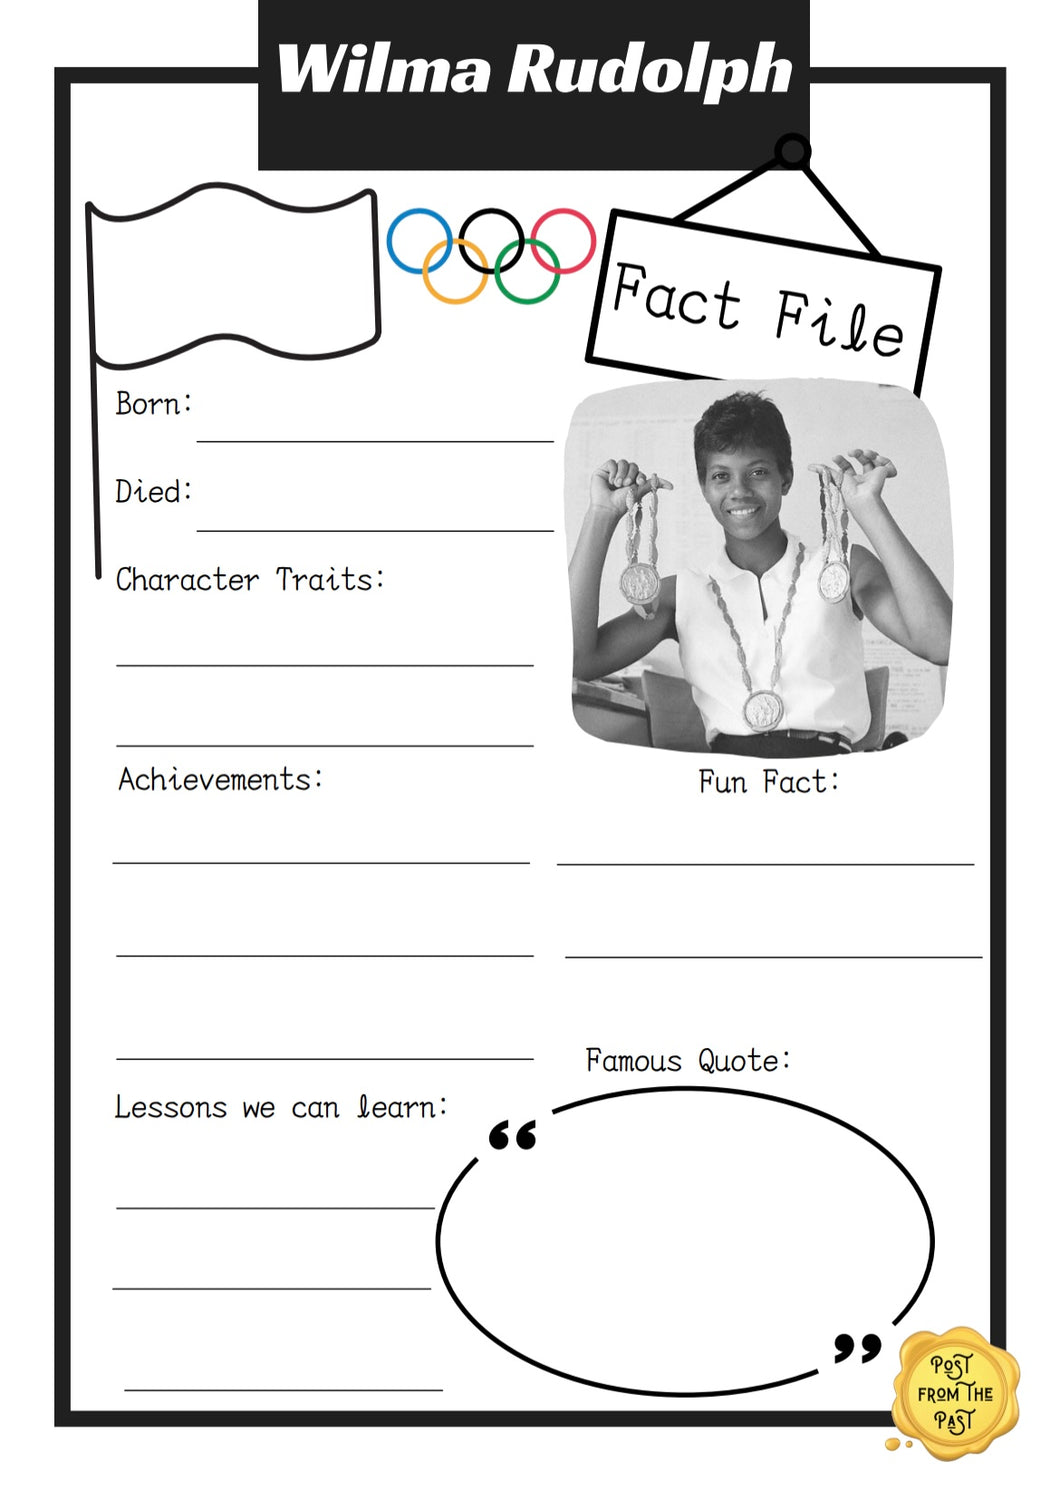 Wilma Rudolph Fact File